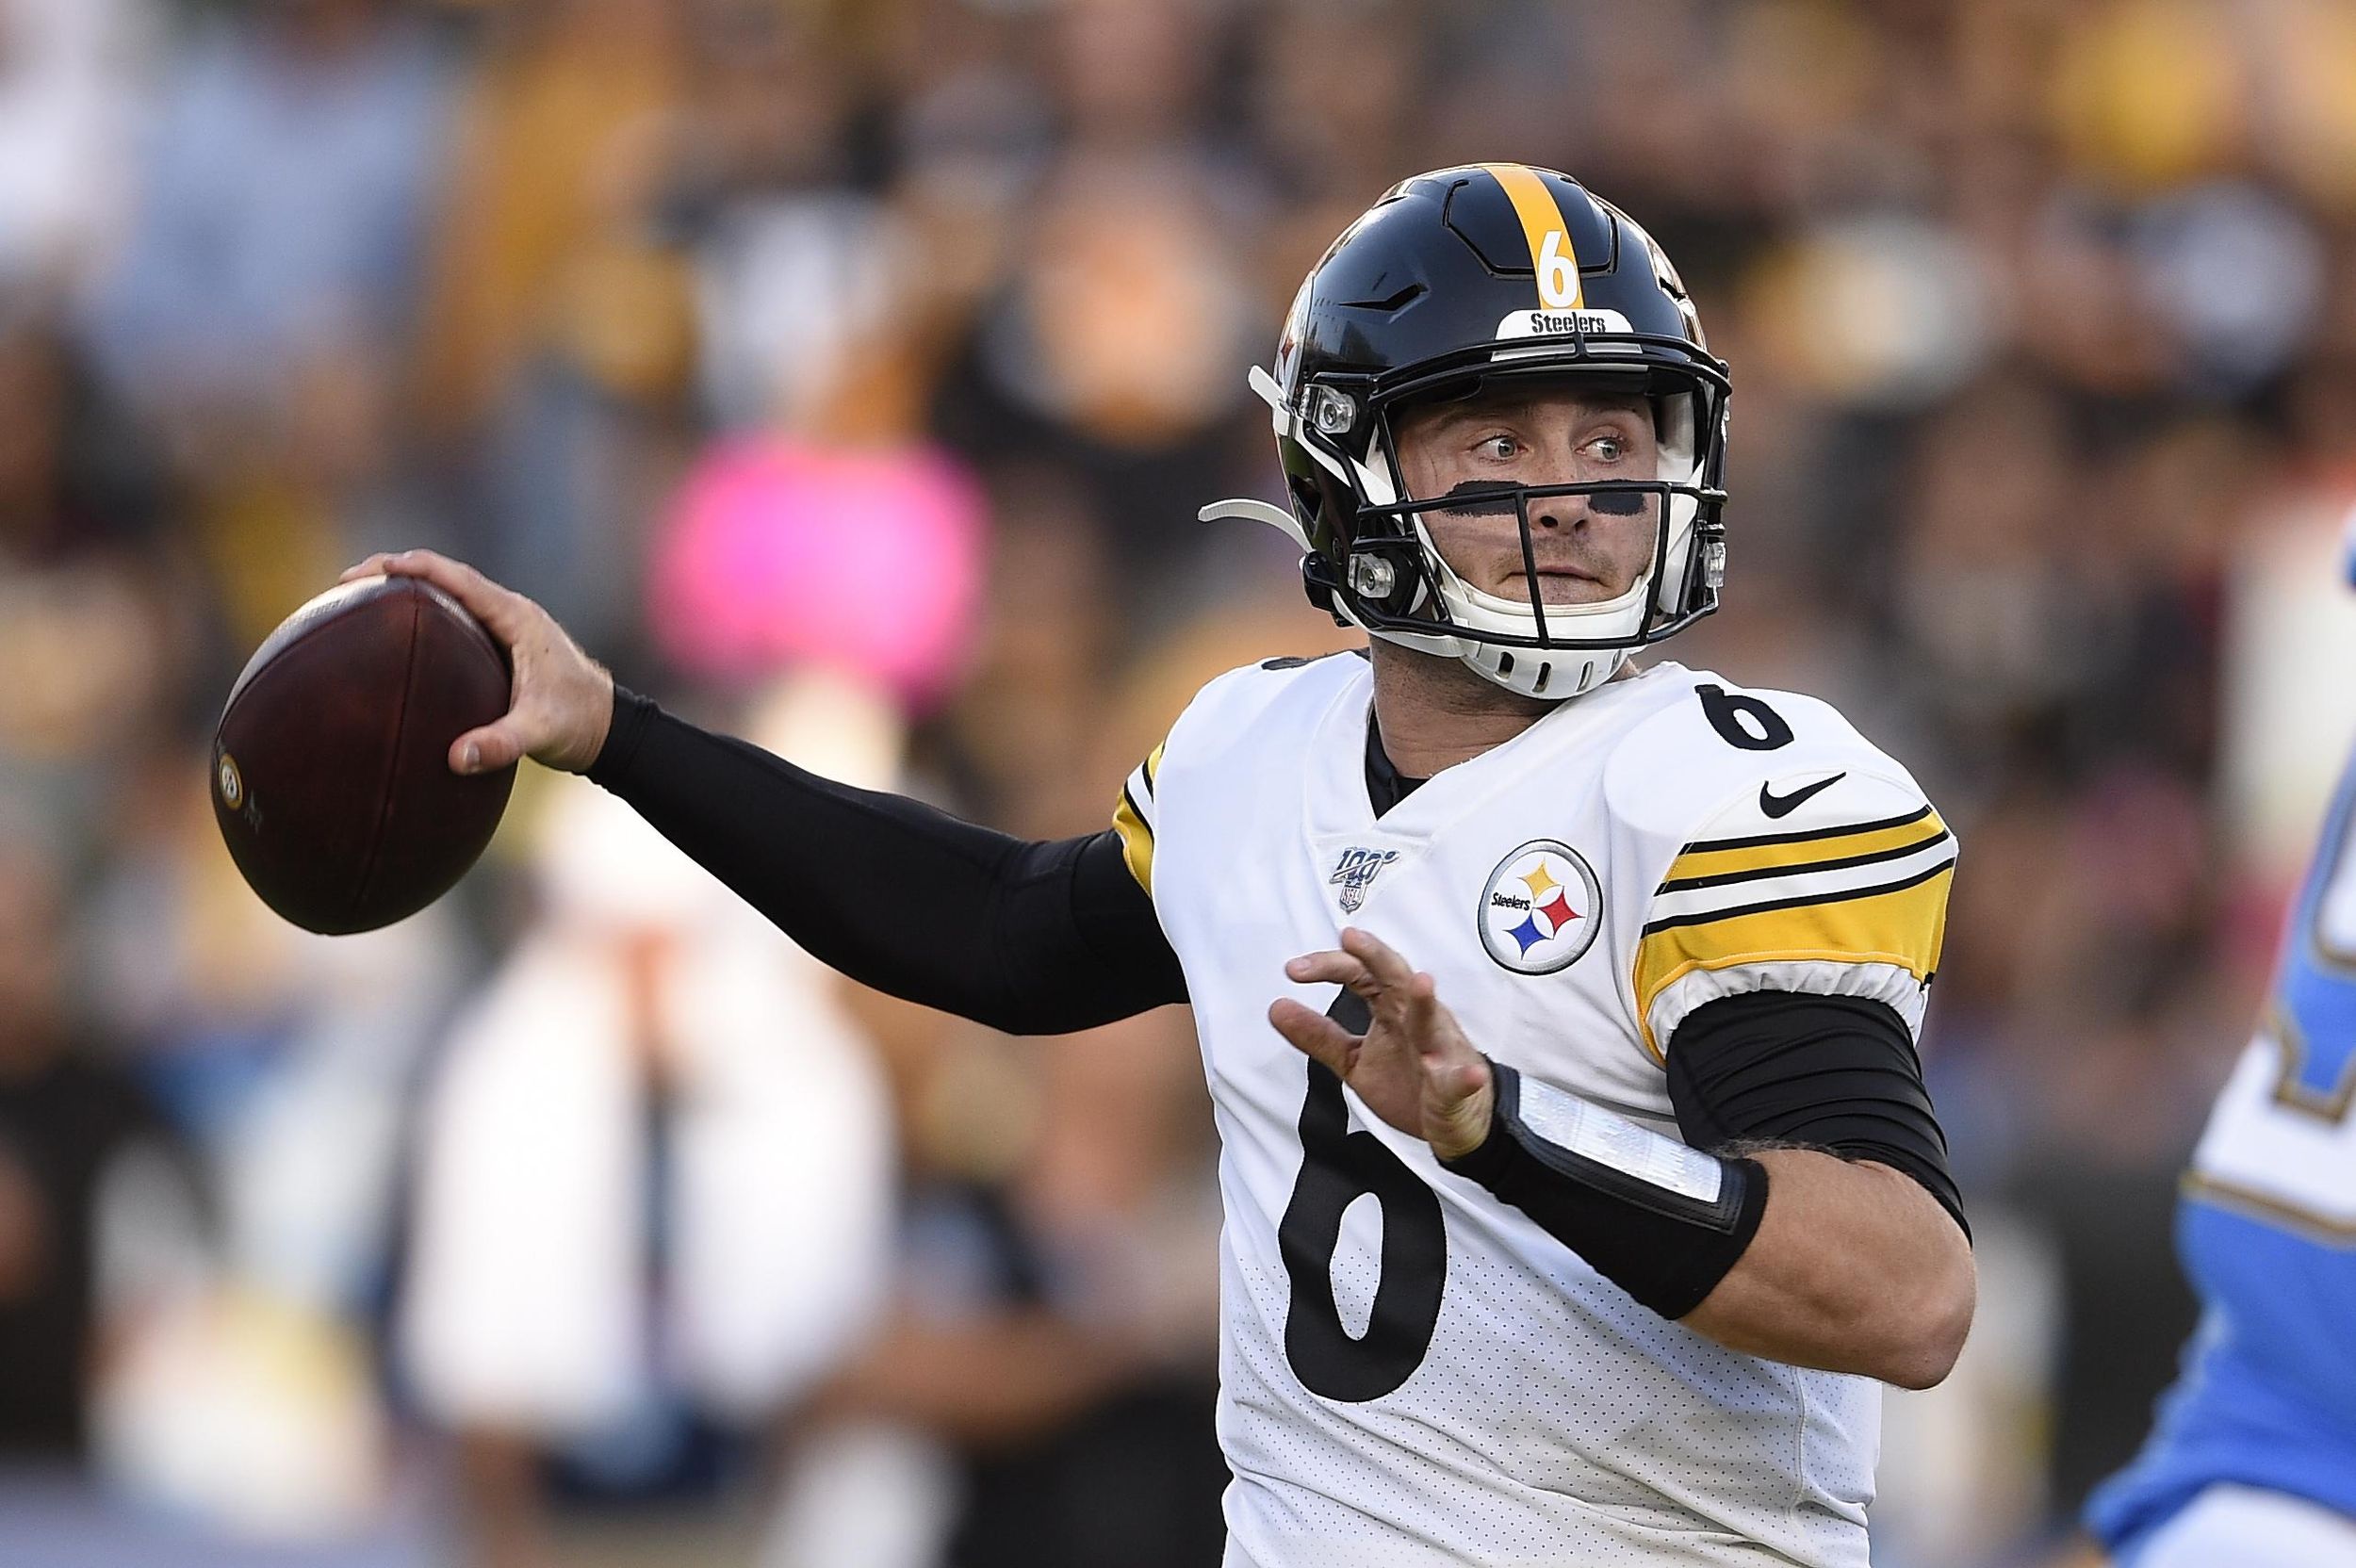 Steelers QB Mason Rudolph will return as starter after concussion The